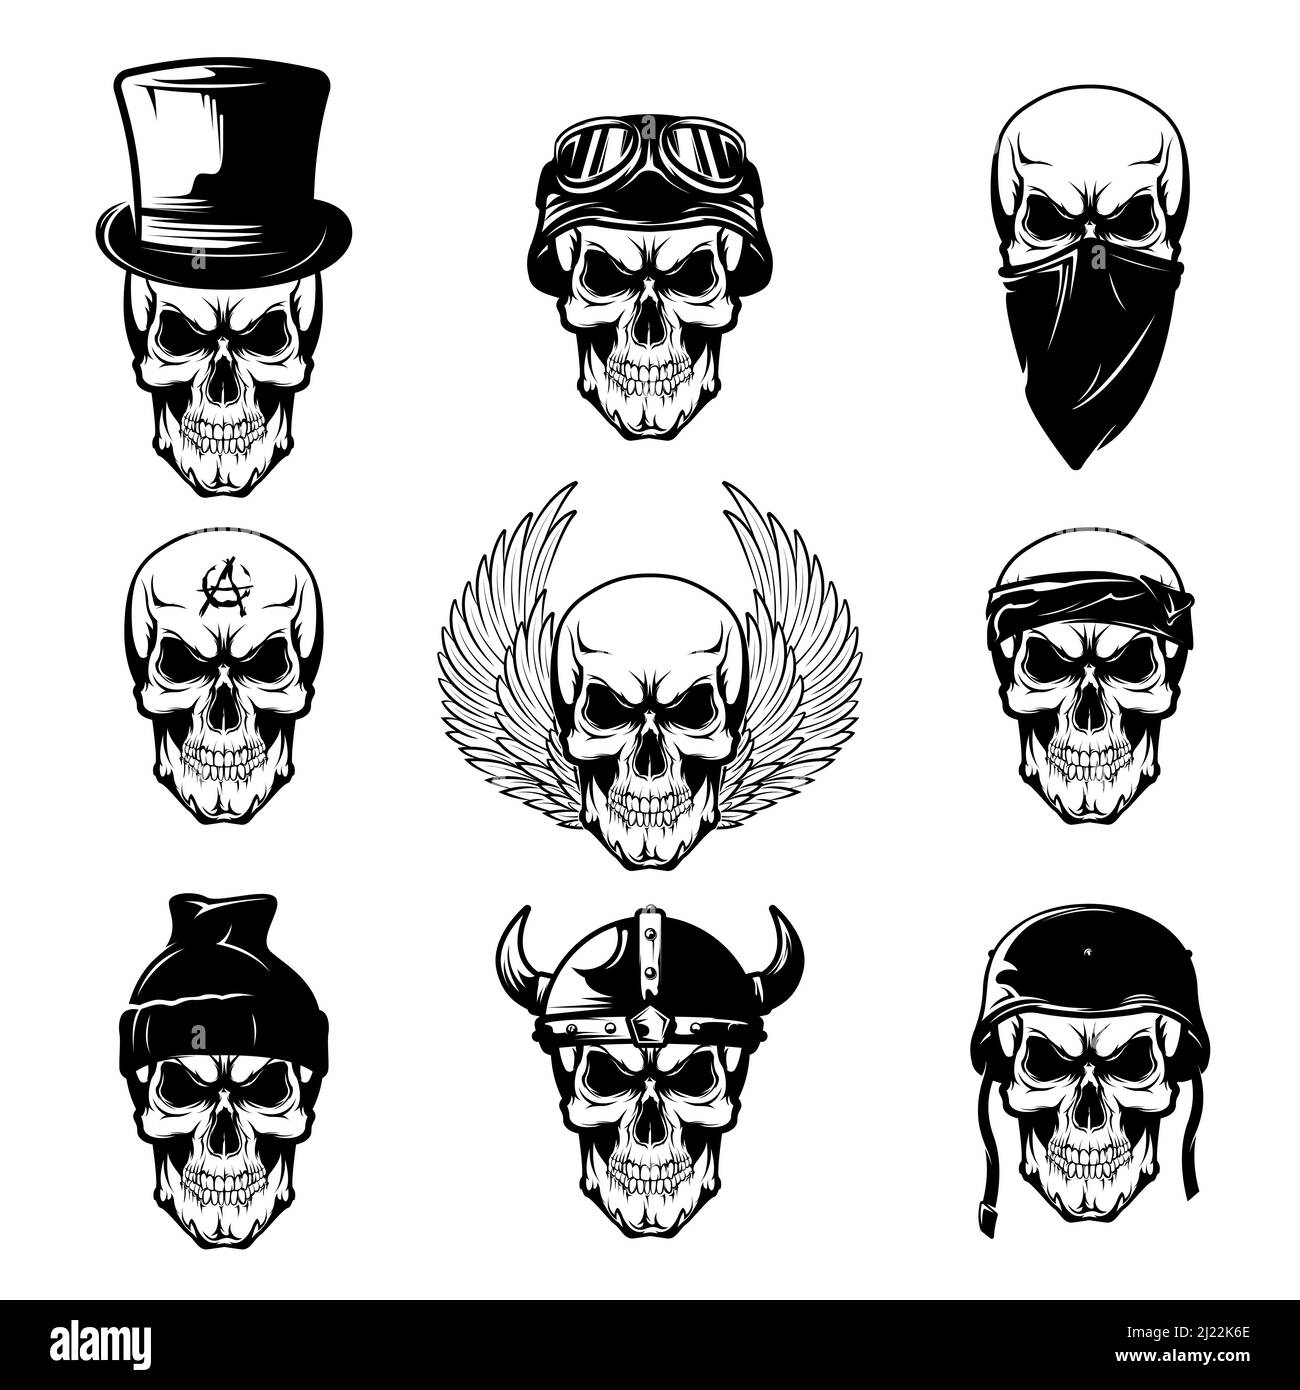 100 Awesome Skull Tattoo Designs  Art and Design  Skull sleeve tattoos  Indian skull tattoos Skull tattoos